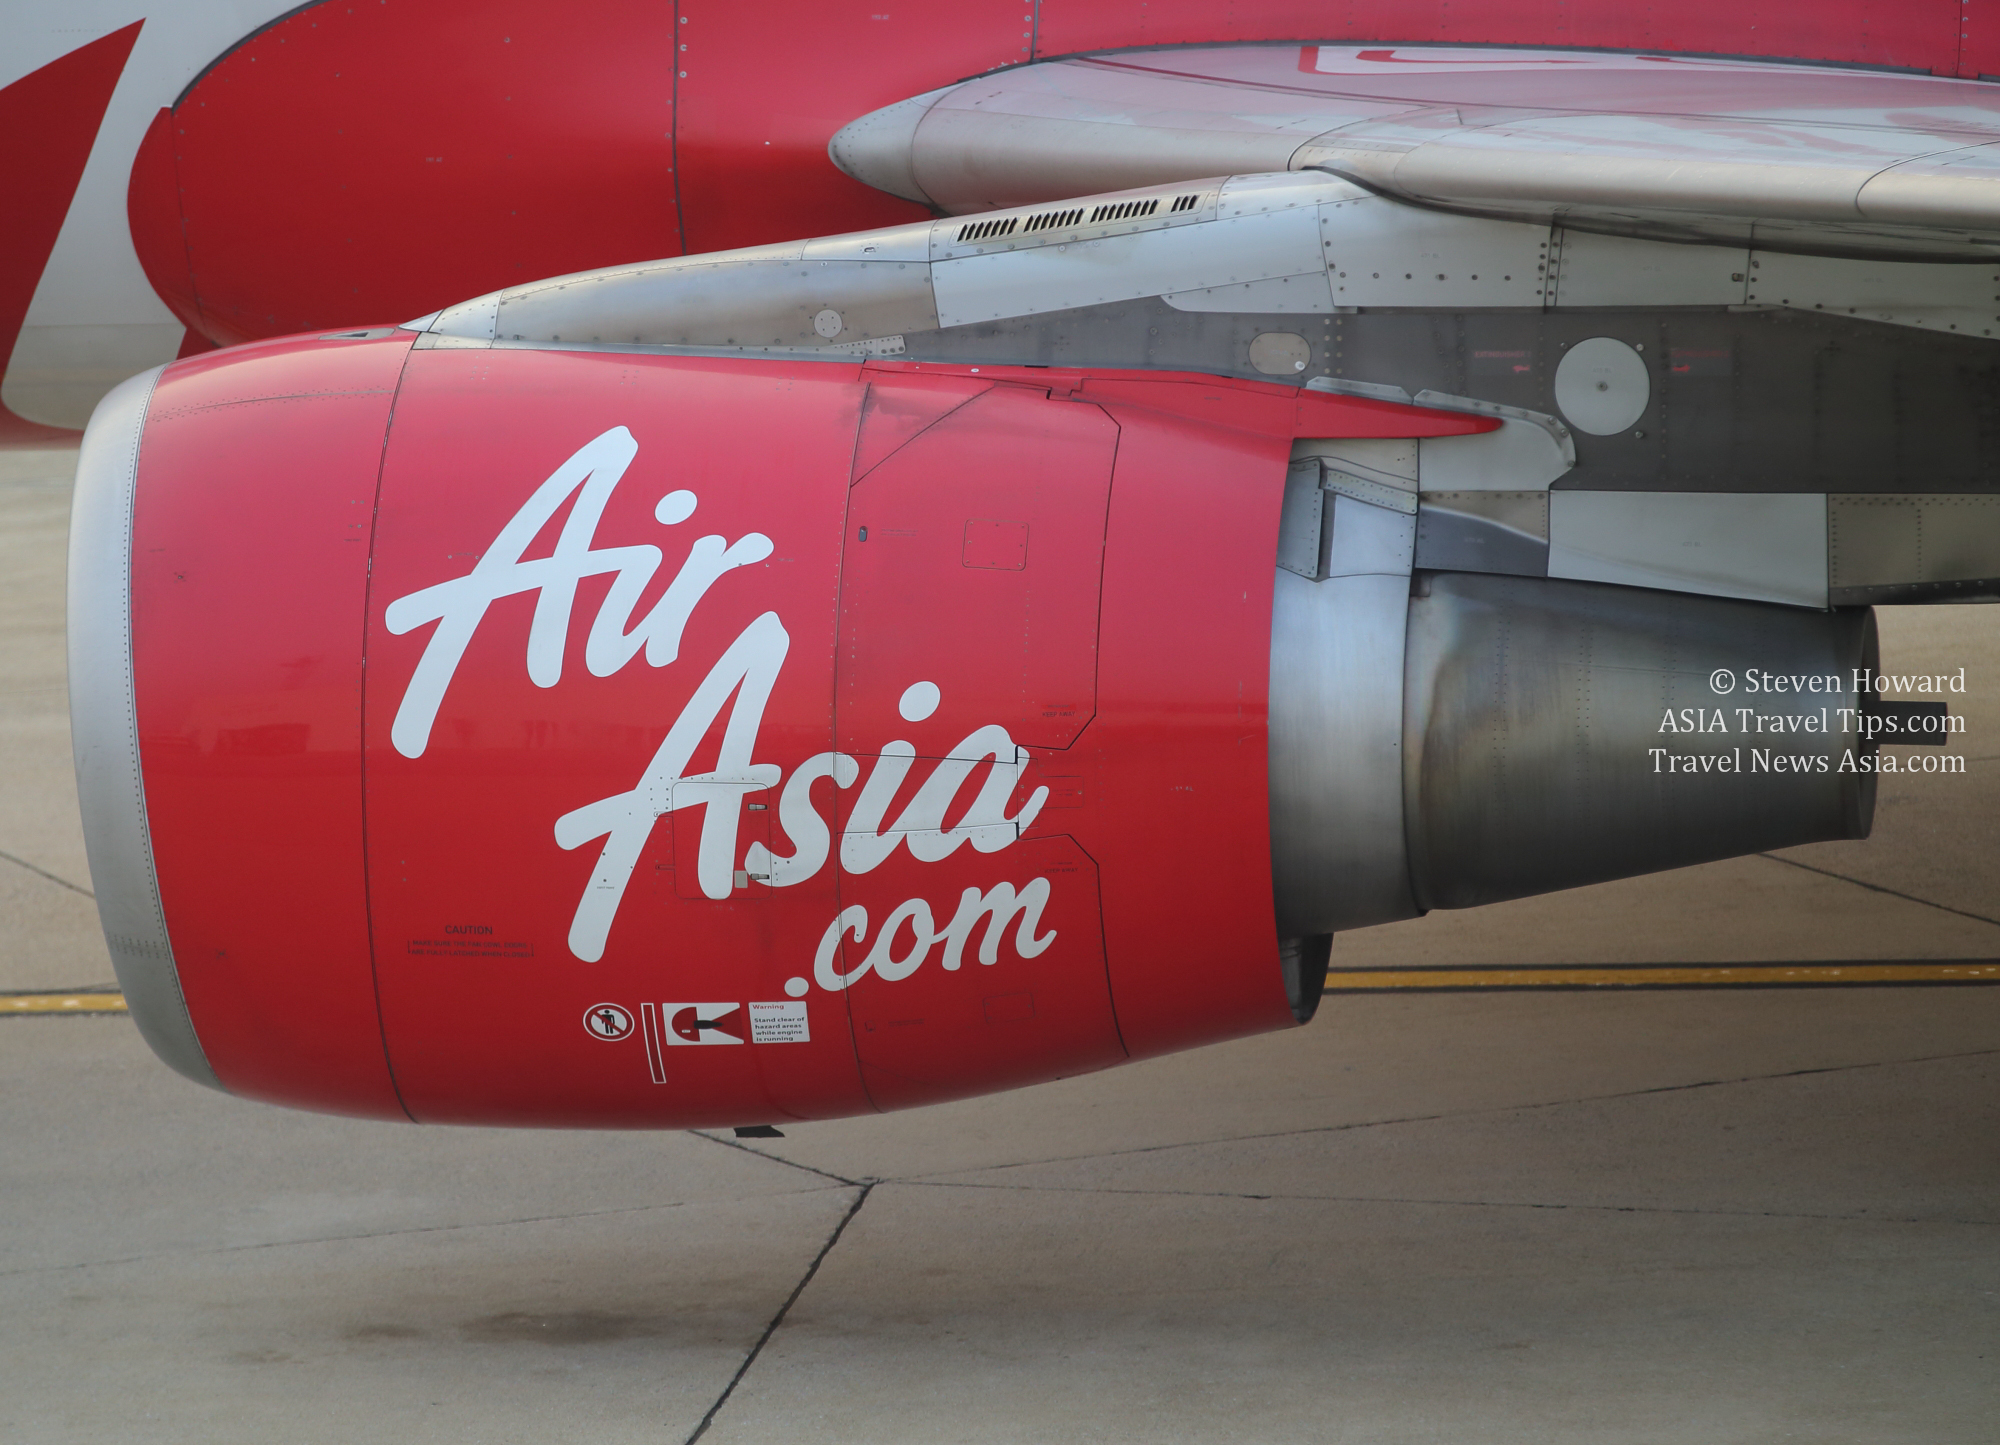 Engine of an AirAsia Airbus A320. Picture by Steven Howard of TravelNewsAsia.com Click to enlarge.